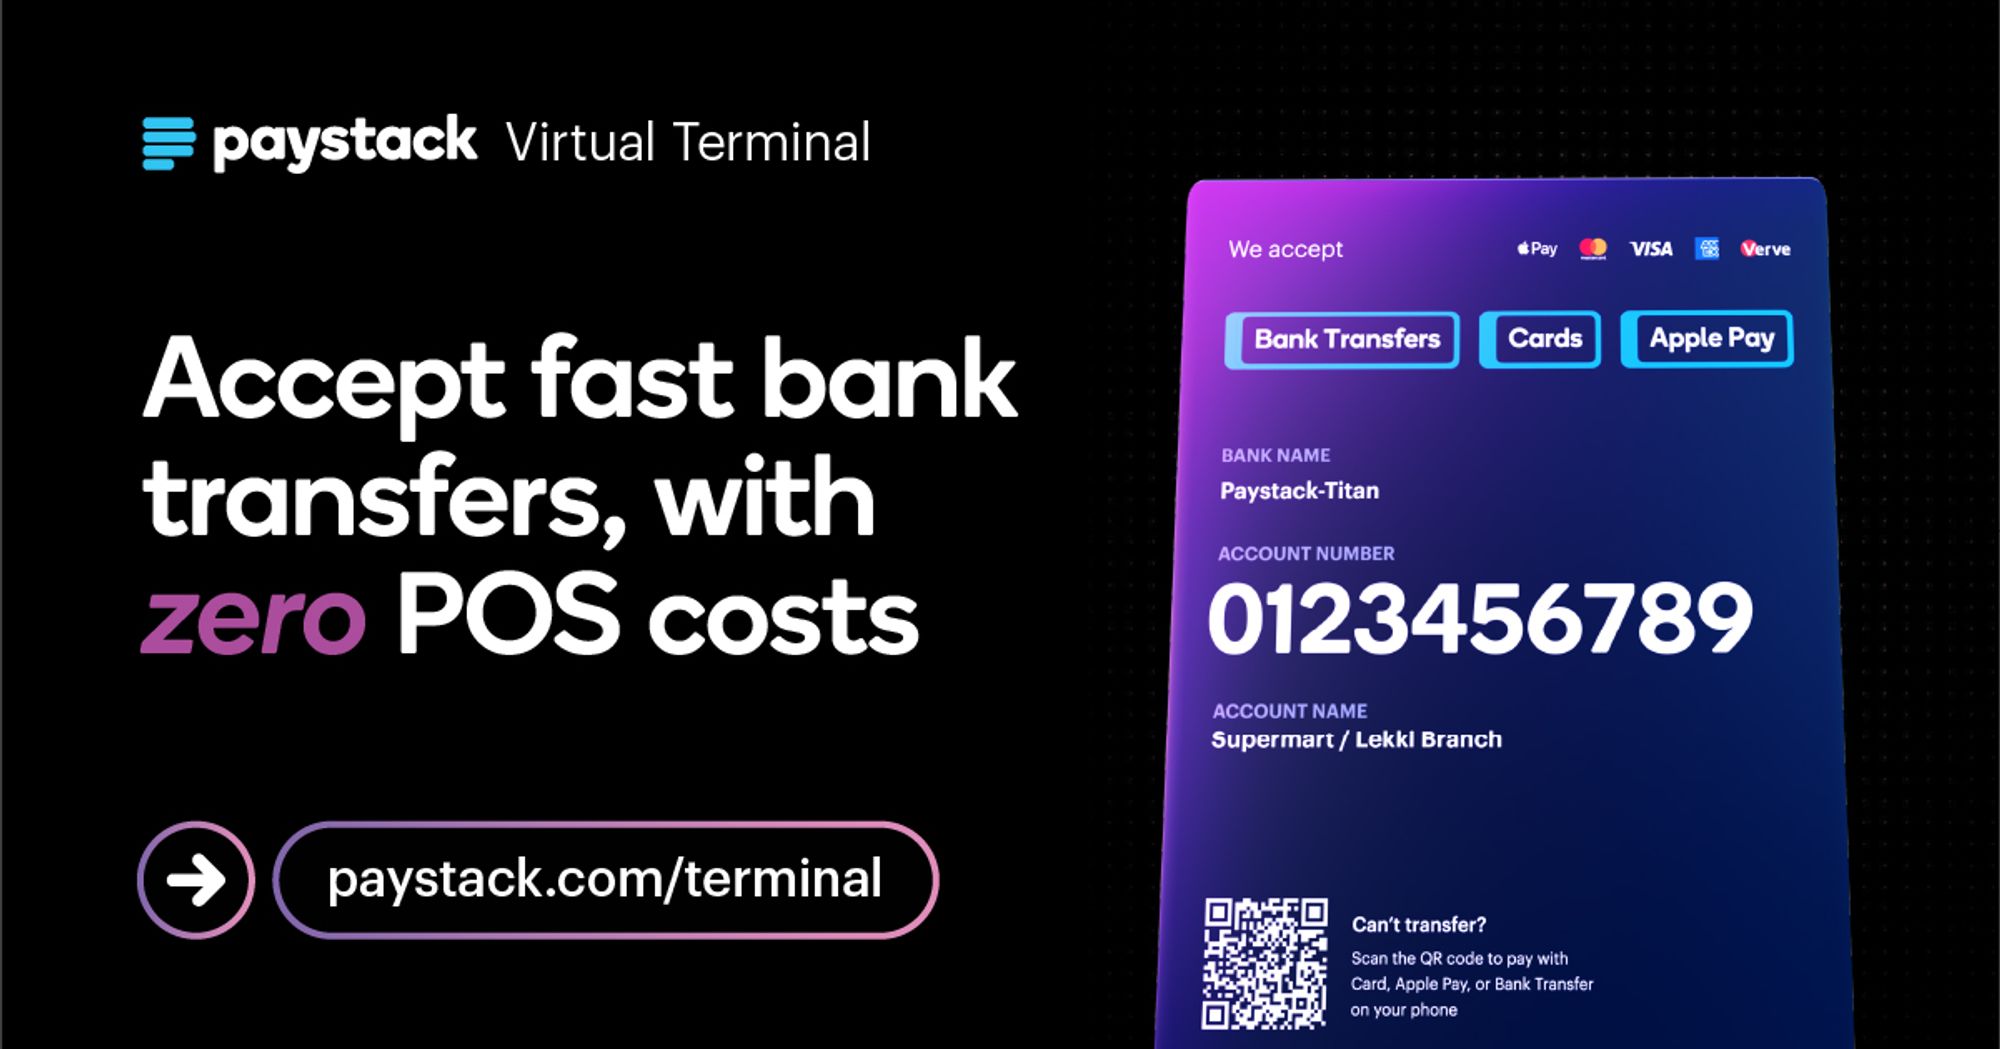 Beryl TV Paystack-Virtual-Terminal 👨🏿‍🚀TechCabal Daily - A ZiG Zag currency Technology 